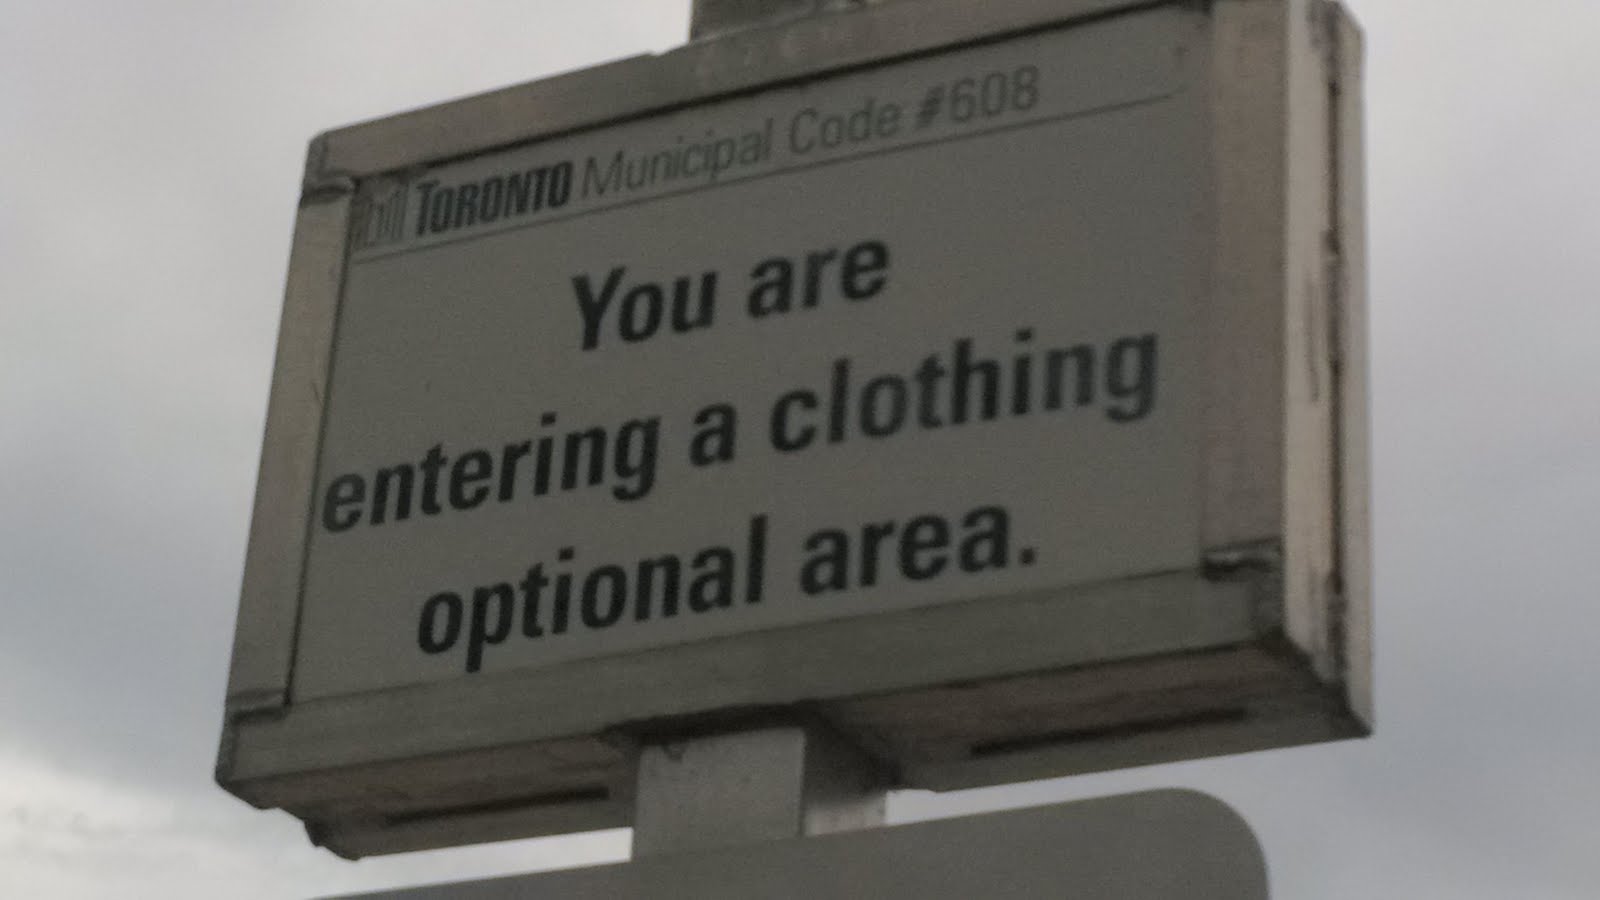 You are entering a clothing optional area